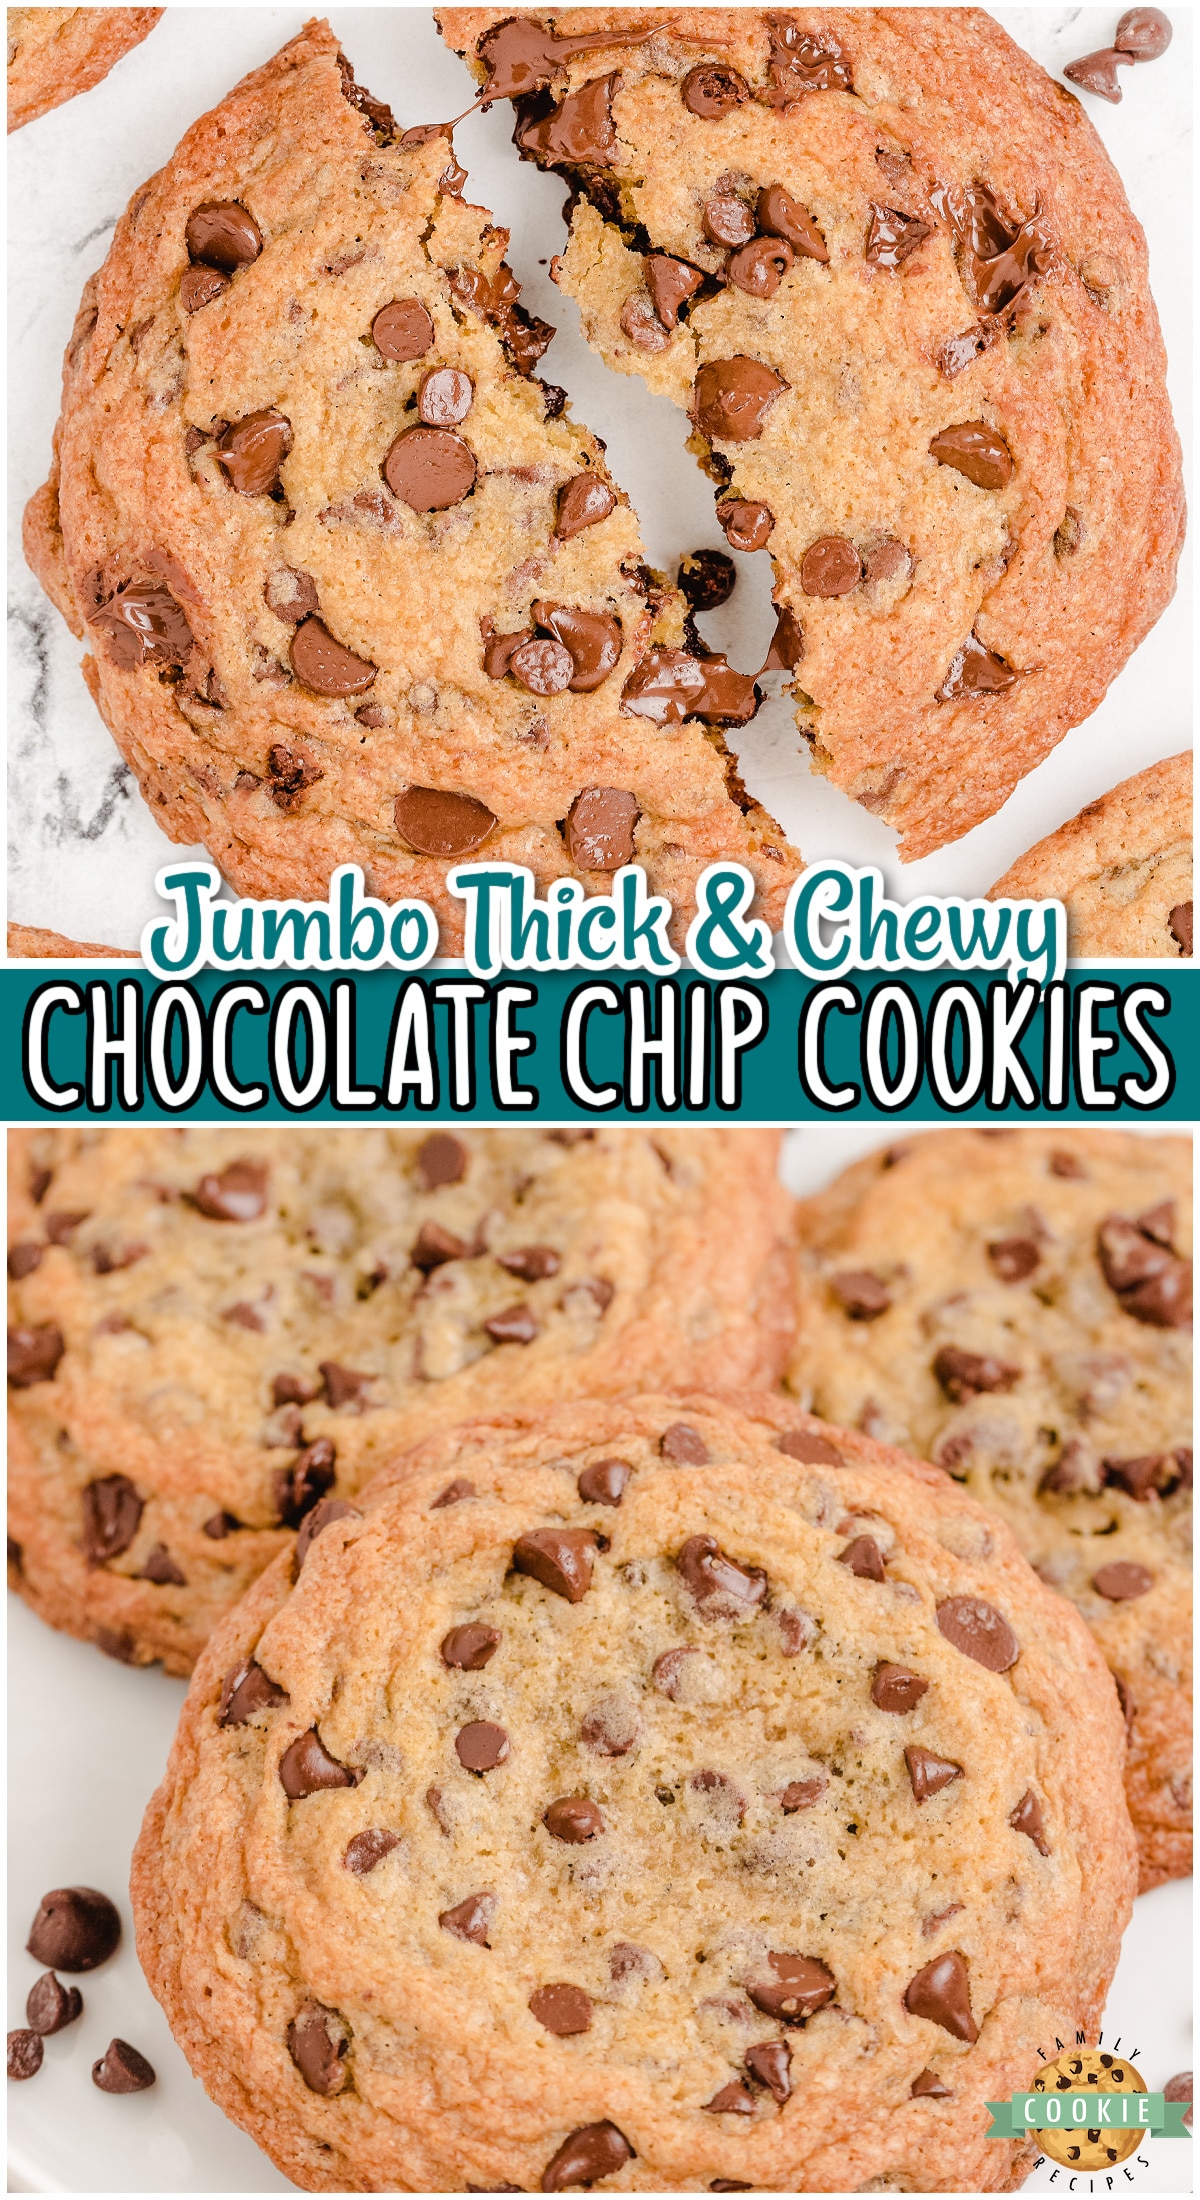 Jumbo Chocolate Chip Cookies made with classic ingredients & twice the size of traditional cookies! Soft, chewy & thick chocolate chip recipe perfect for cookie lovers!